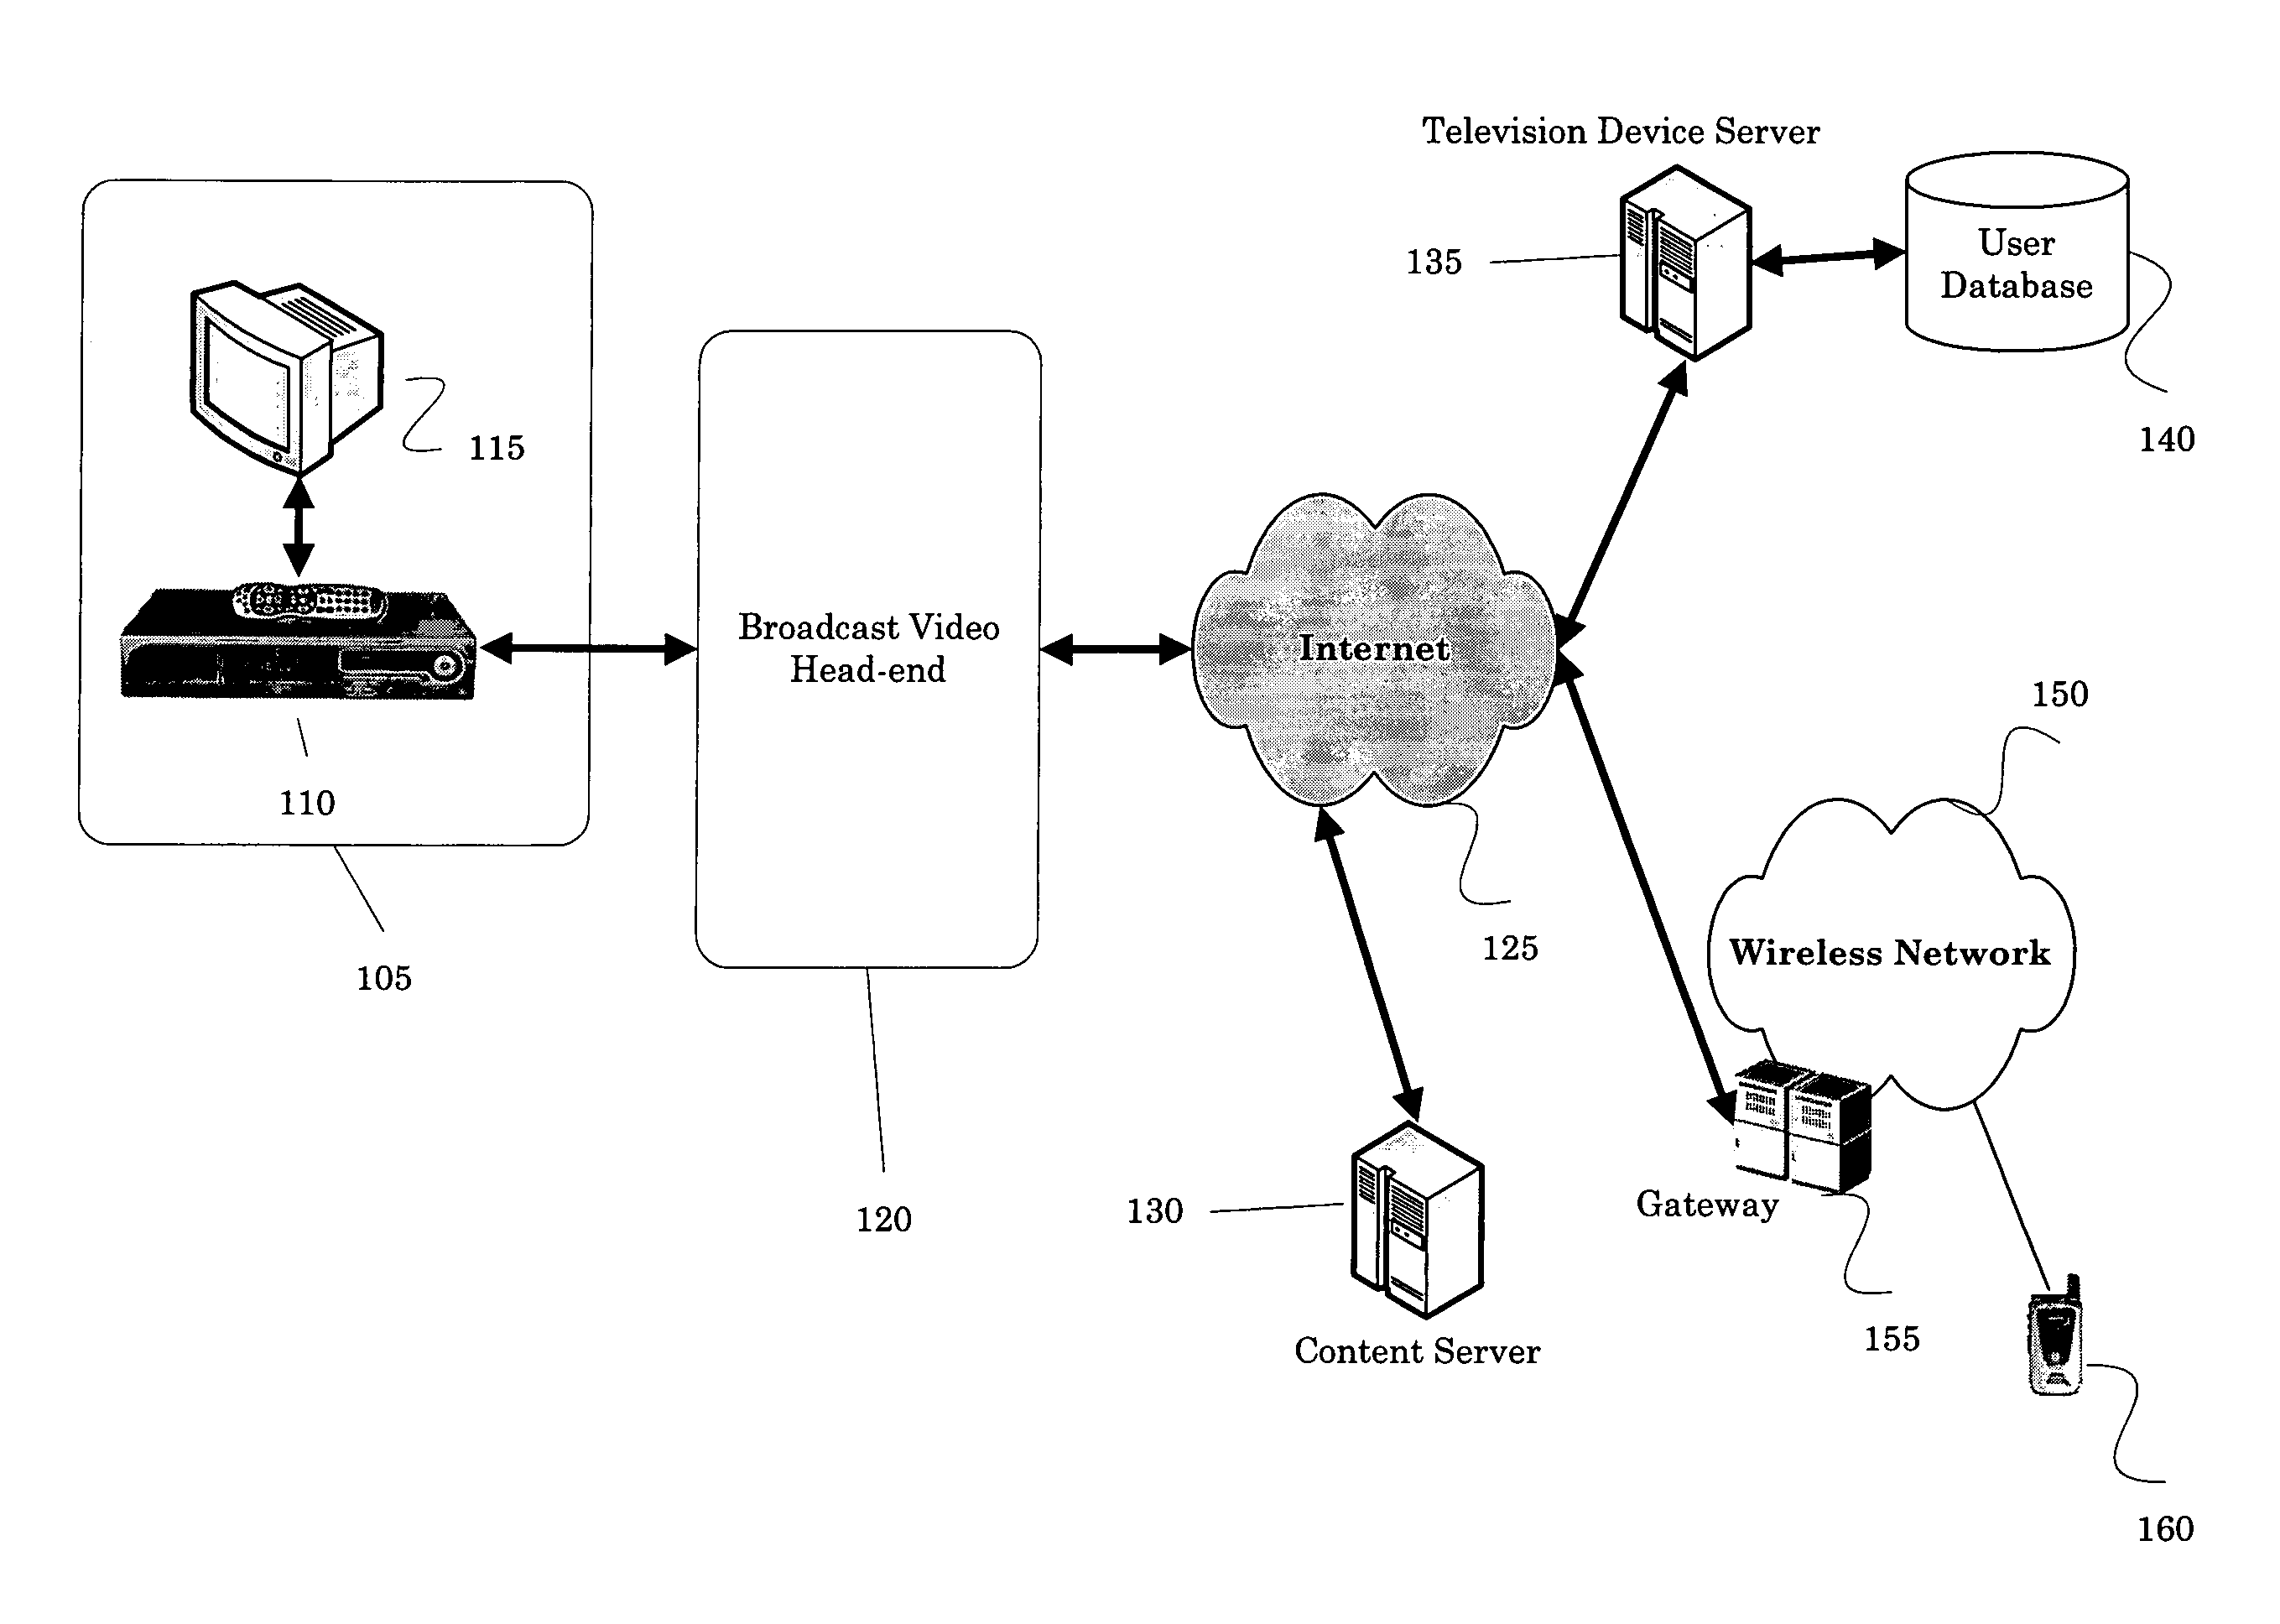 Systems and methods for scheduling the recording of audio and/or visual content